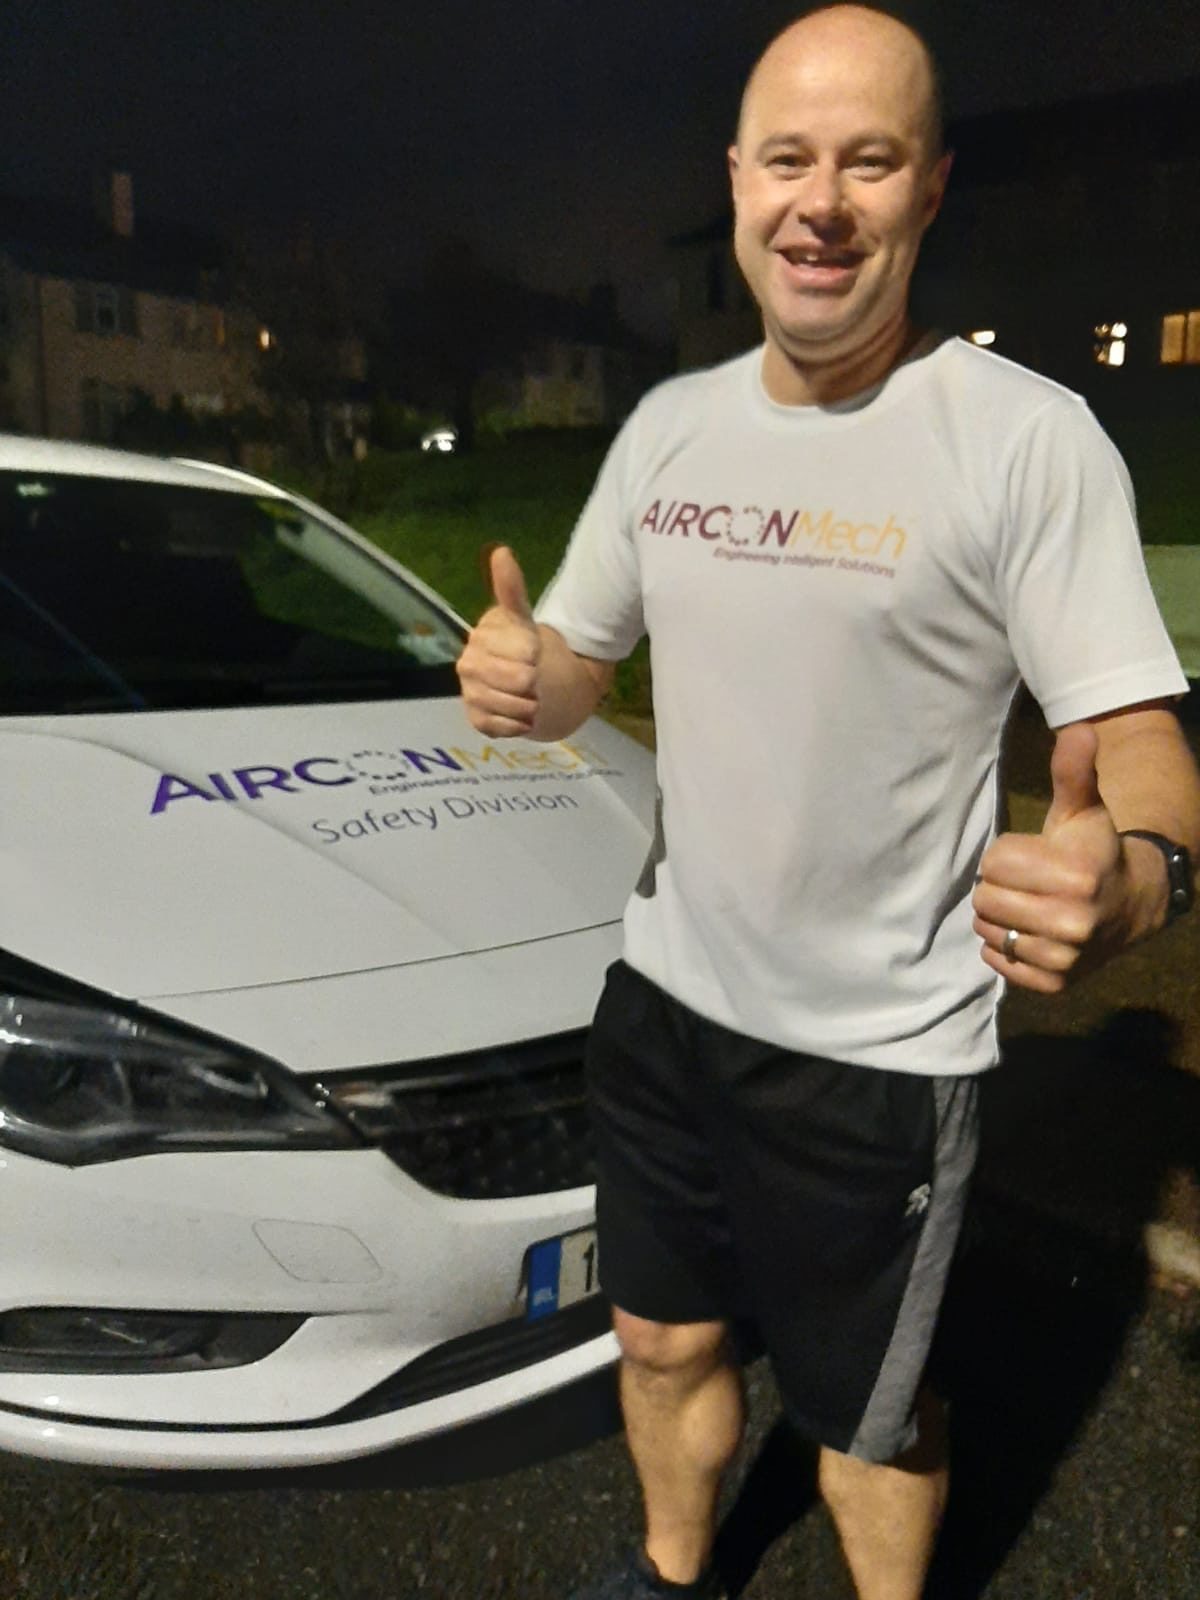 EHS Manager Sean Rath completes 10K Run in the Dark Charity Challenge